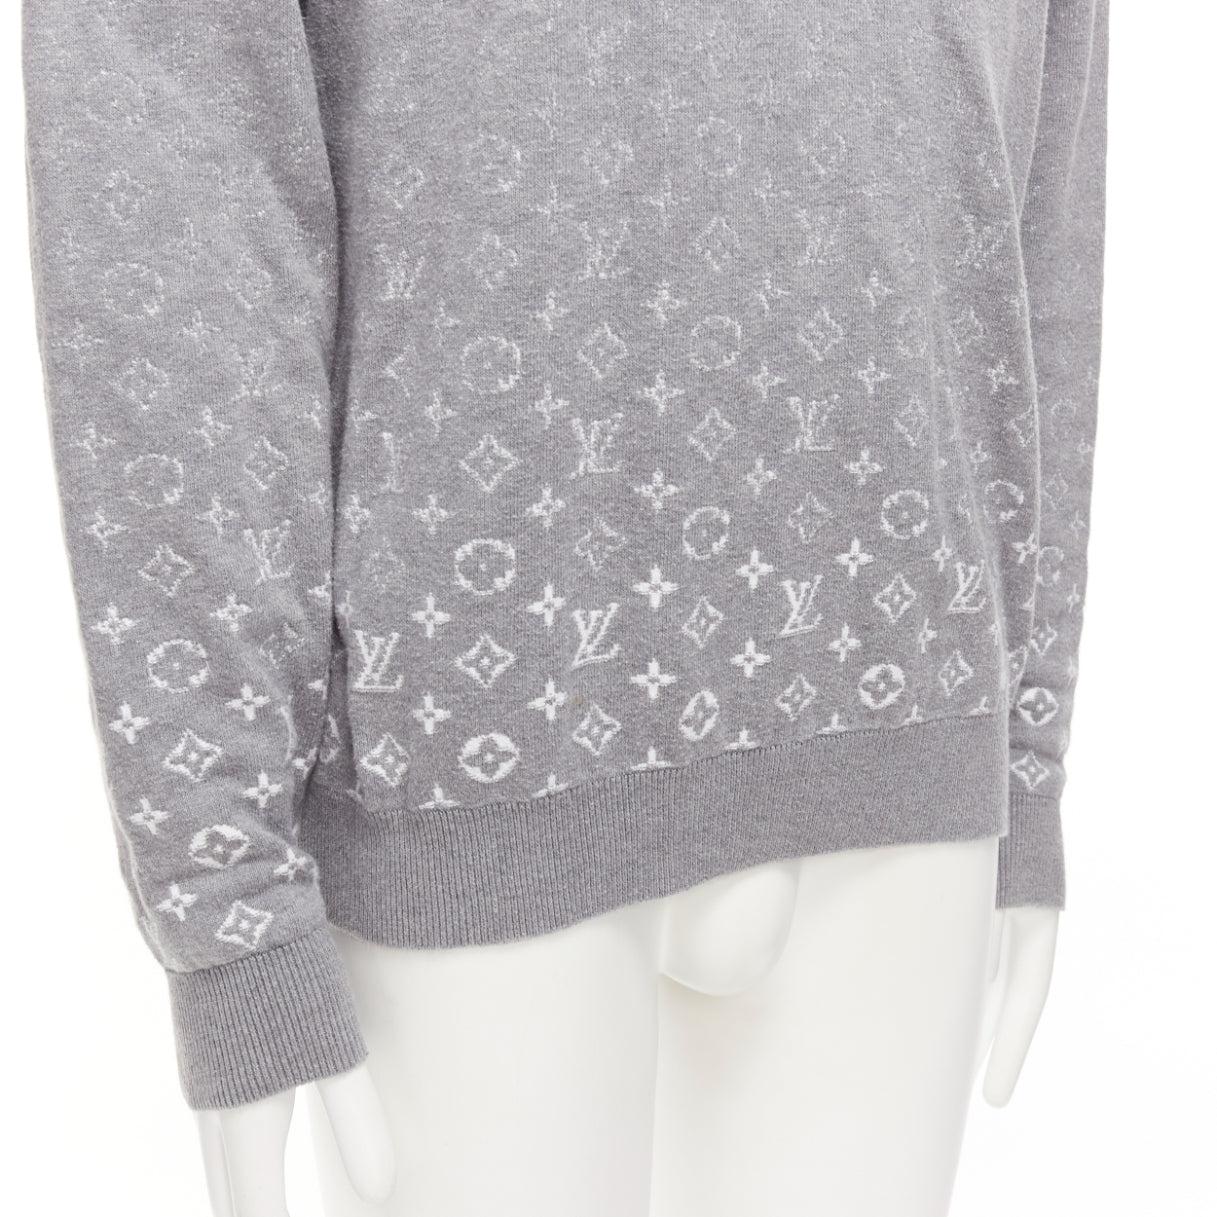 LOUIS VUITTON grey white ombre LV logo monogram crew sweatshirt L
Reference: YIKK/A00007
Brand: Louis Vuitton
Designer: Virgil Abloh
Material: Cotton
Color: White
Pattern: Monogram
Closure: Pullover
Made in: Italy

CONDITION:
Condition: Excellent,